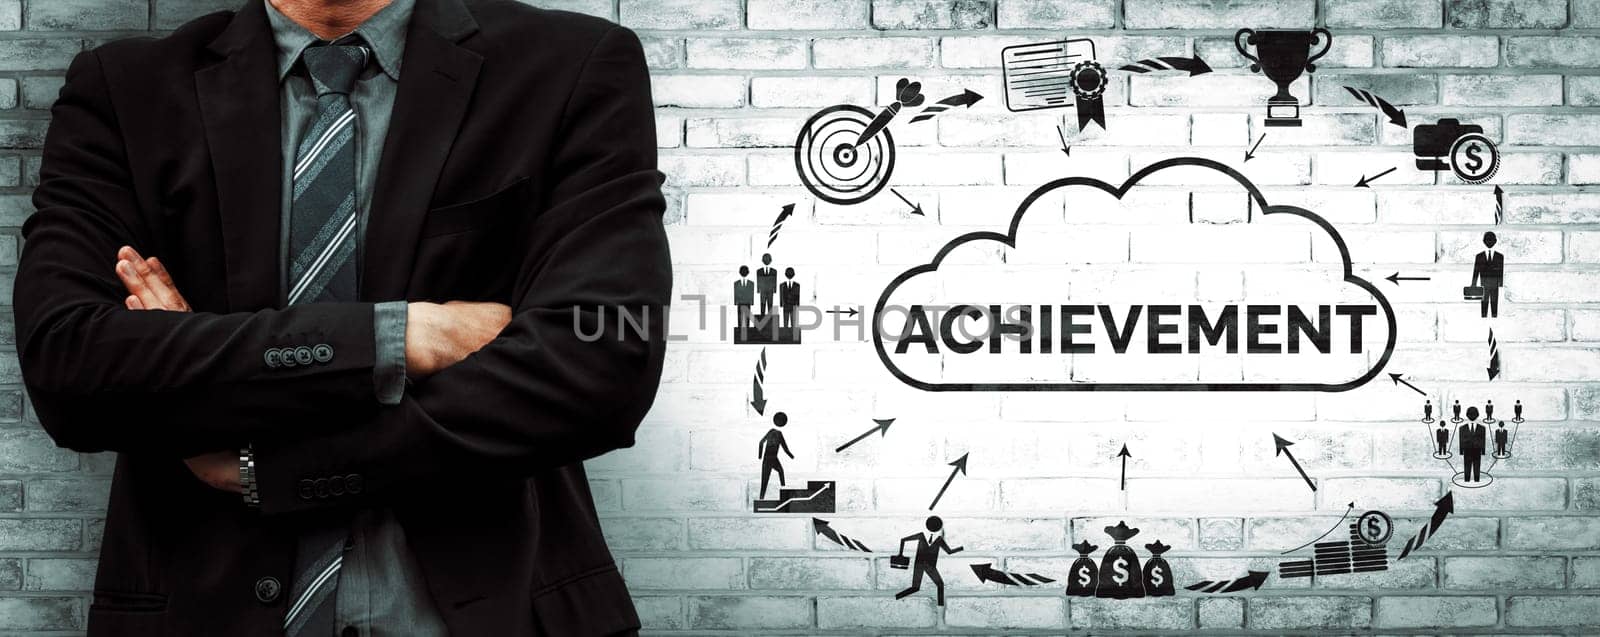 Achievement and Business Goal Success Concept - Creative business people with icon graphic interface showing employee reward giving for business success achievement. uds